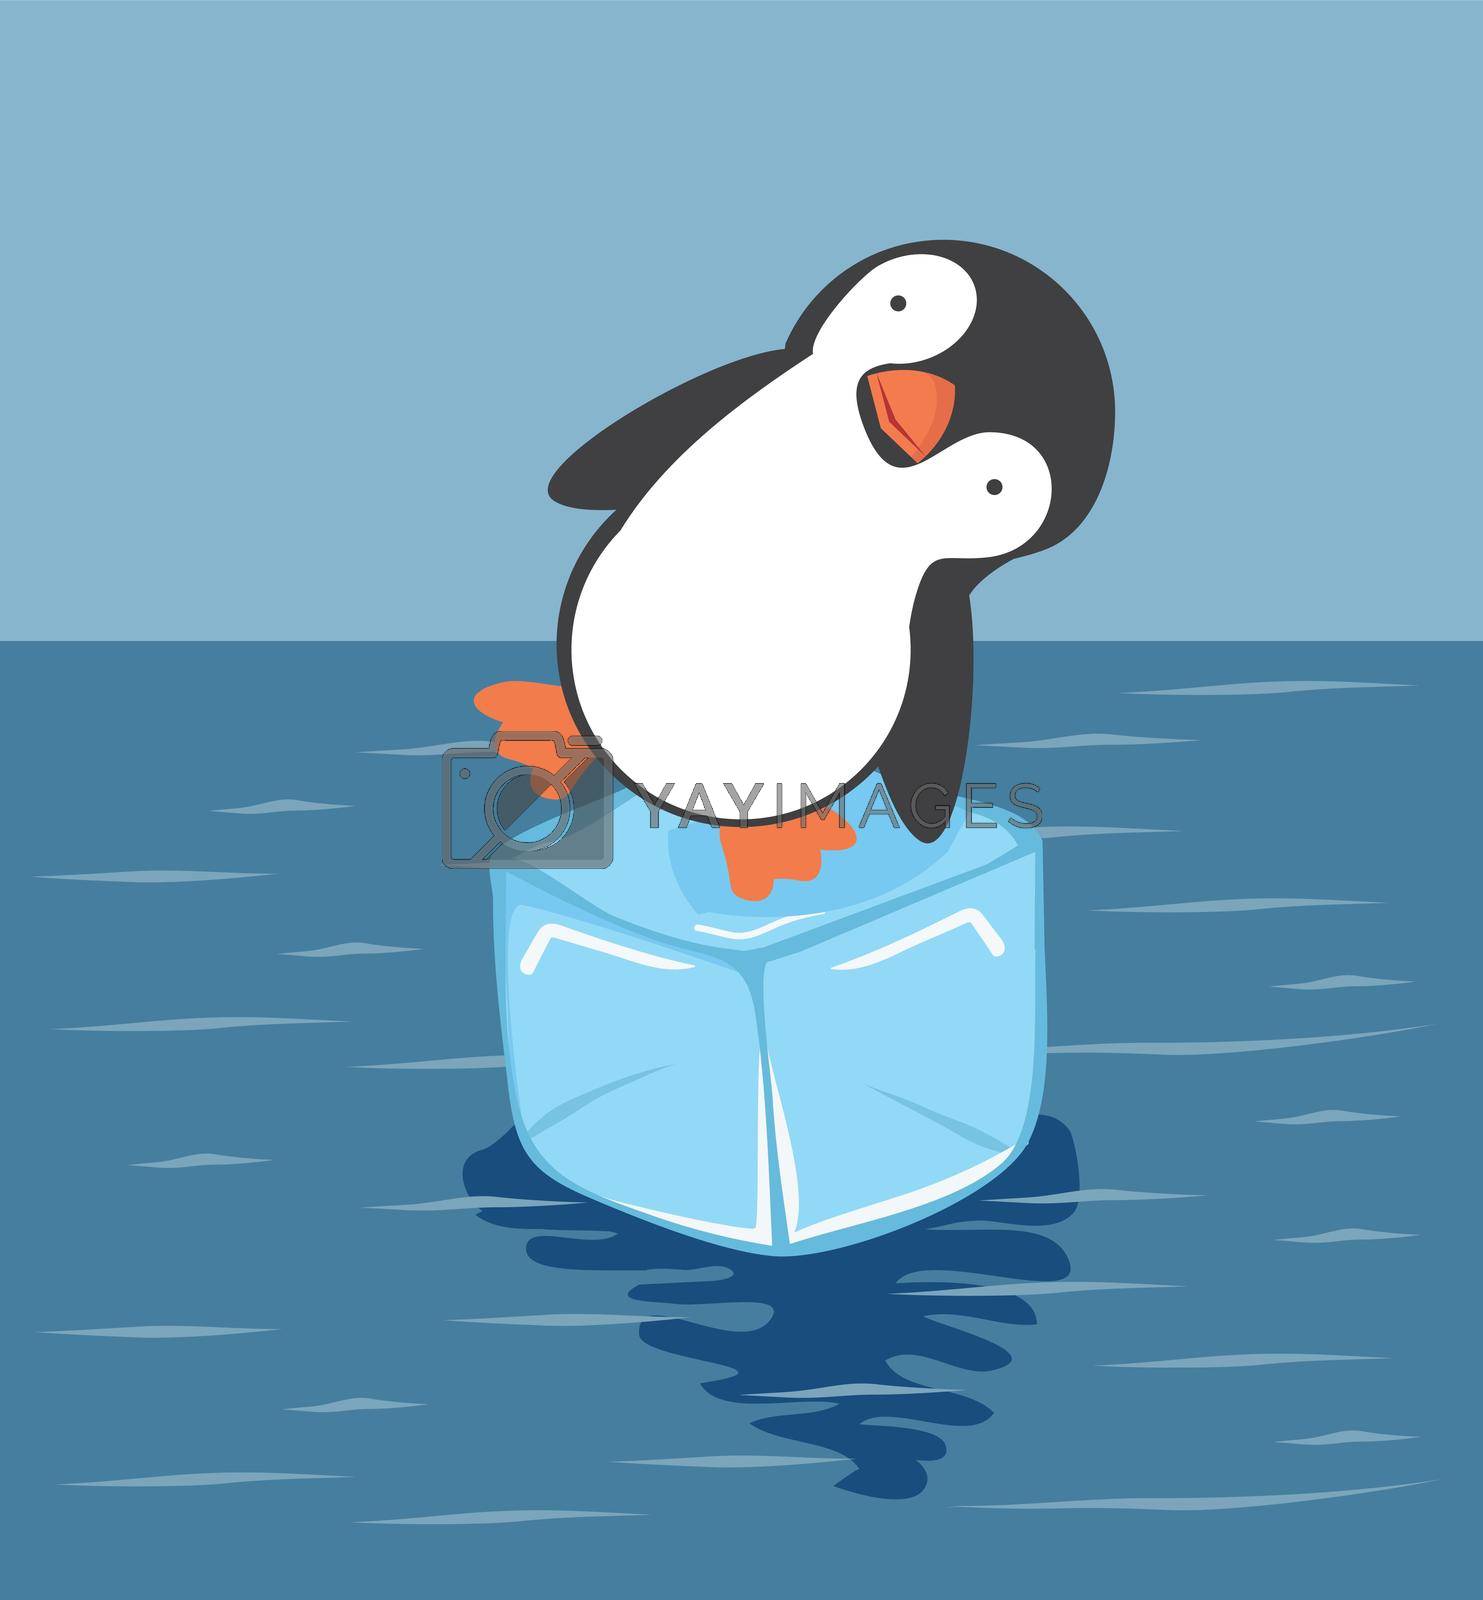 Royalty free image of Cute penguin on  ice cube vector by focus_bell